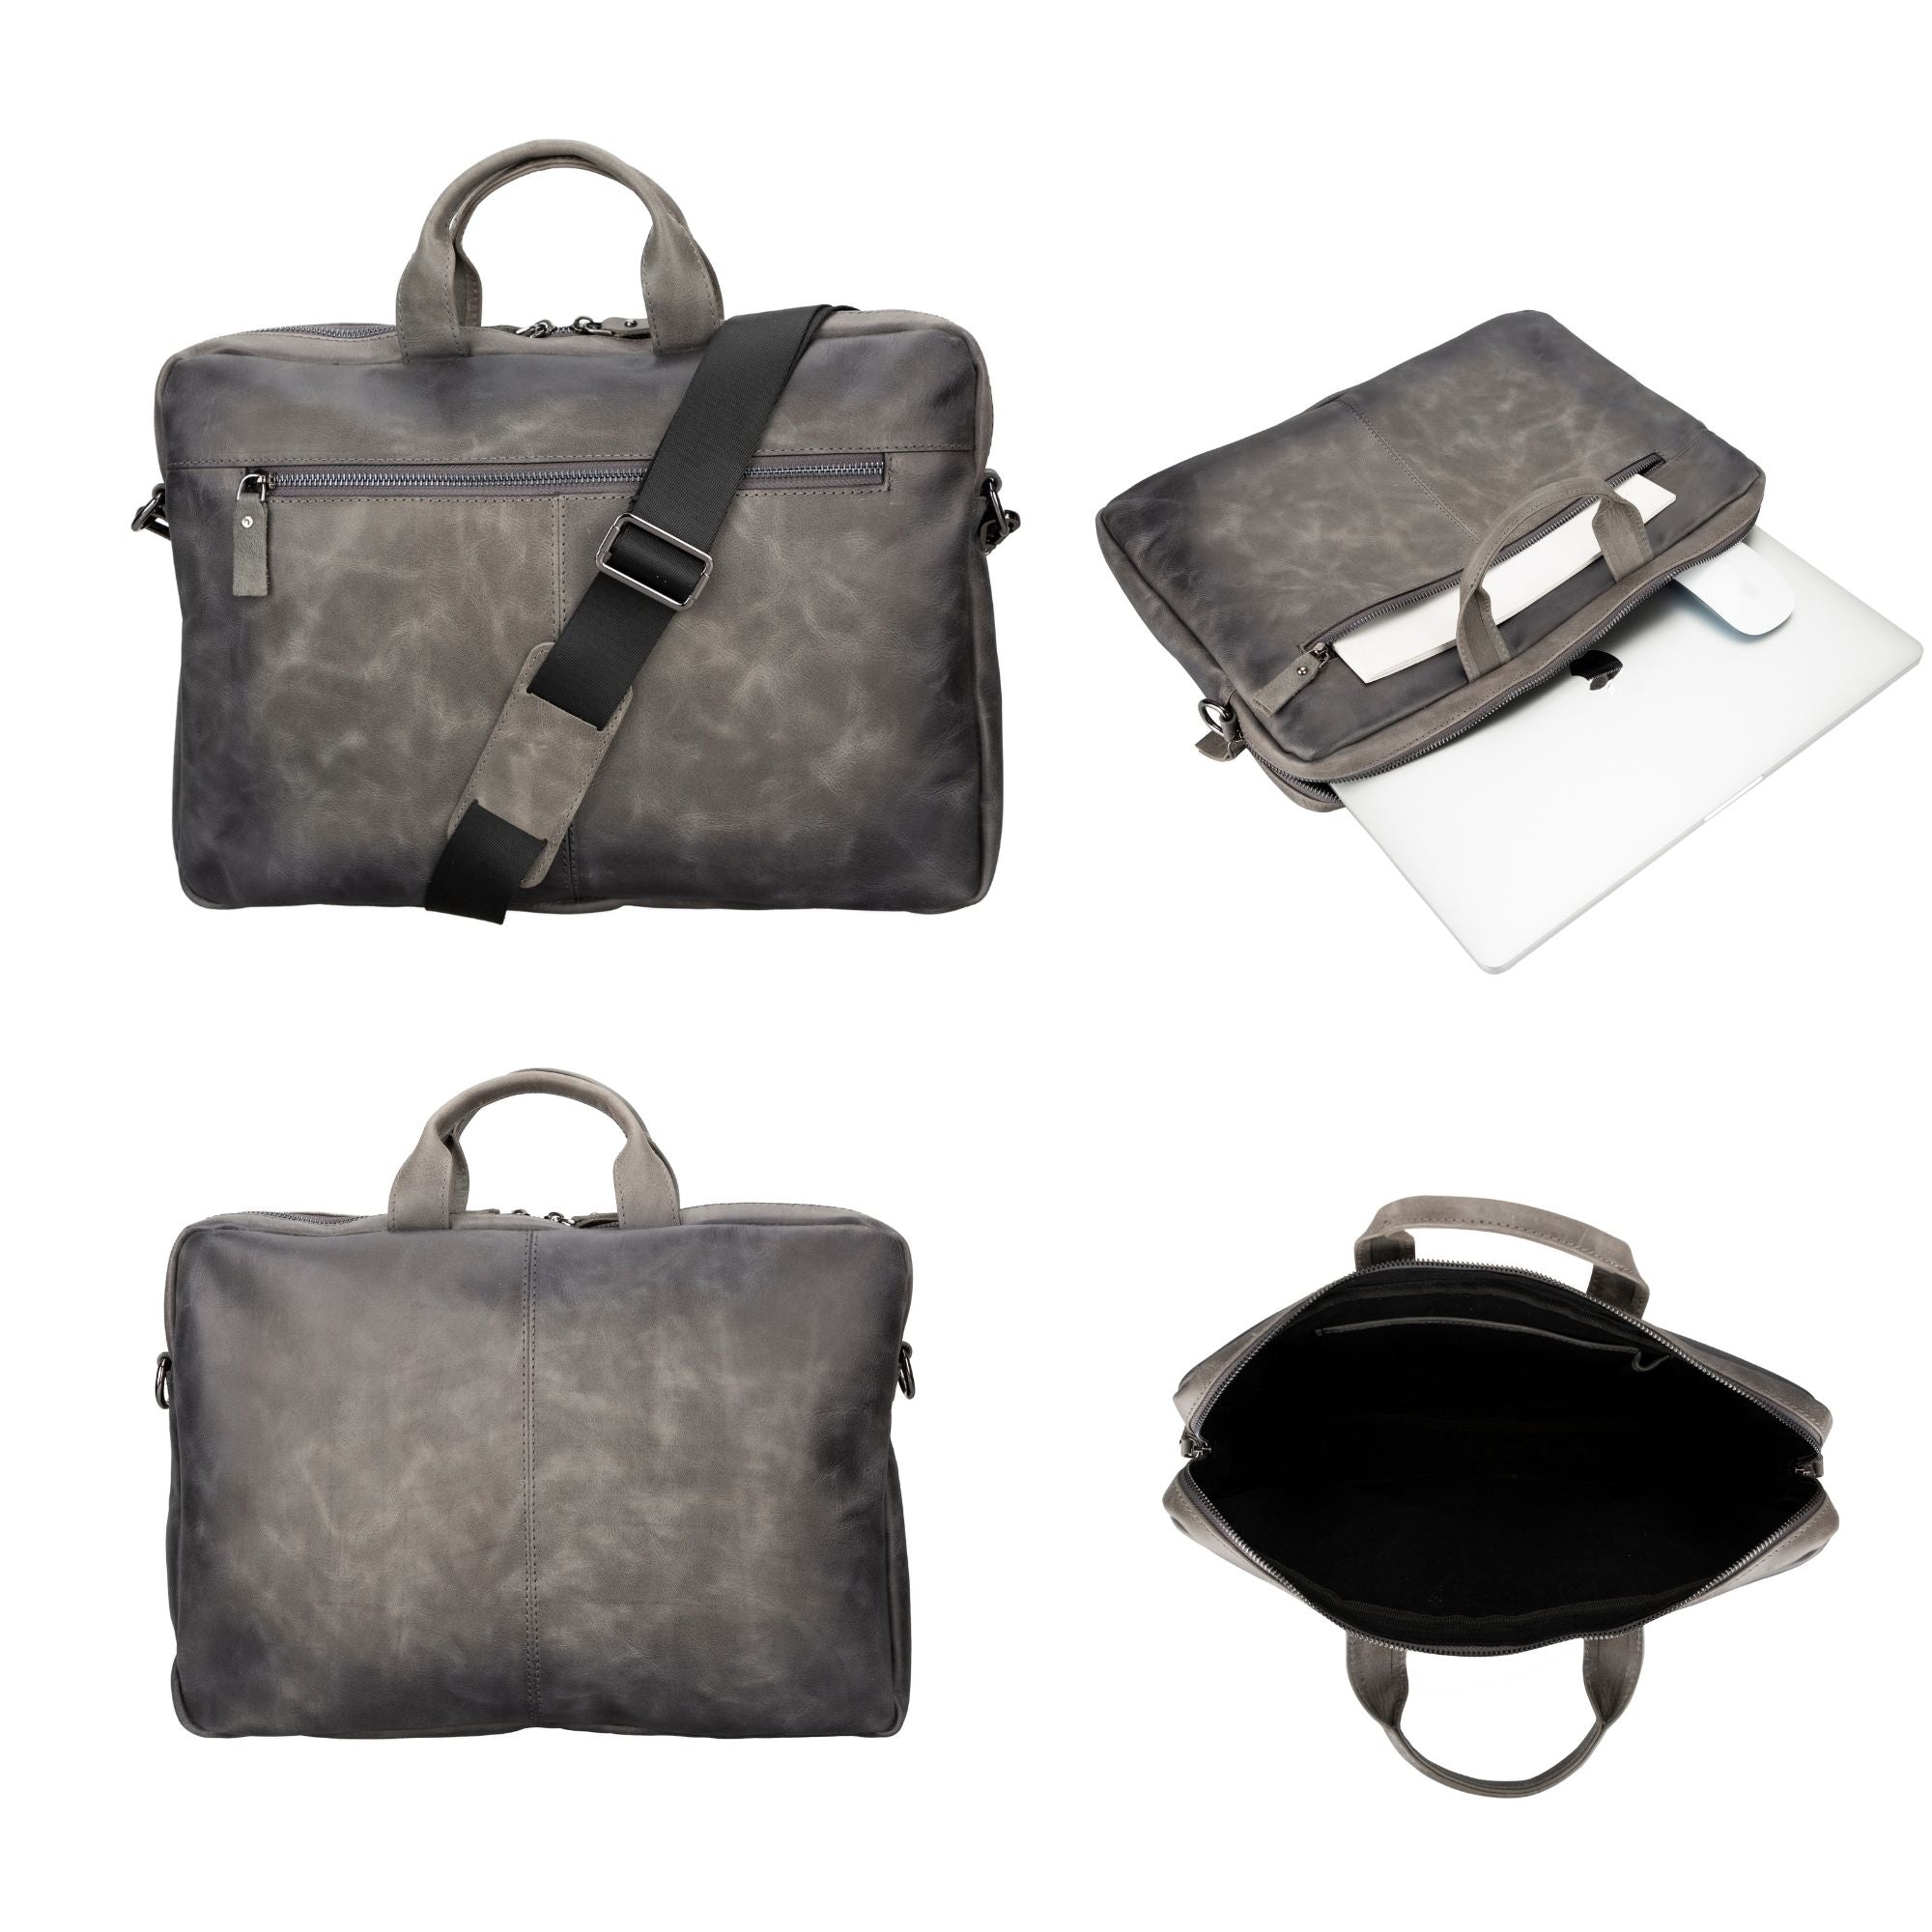 Afton MacBook Leather Sleeve and Bag - 14 Inches - Gray - TORONATA